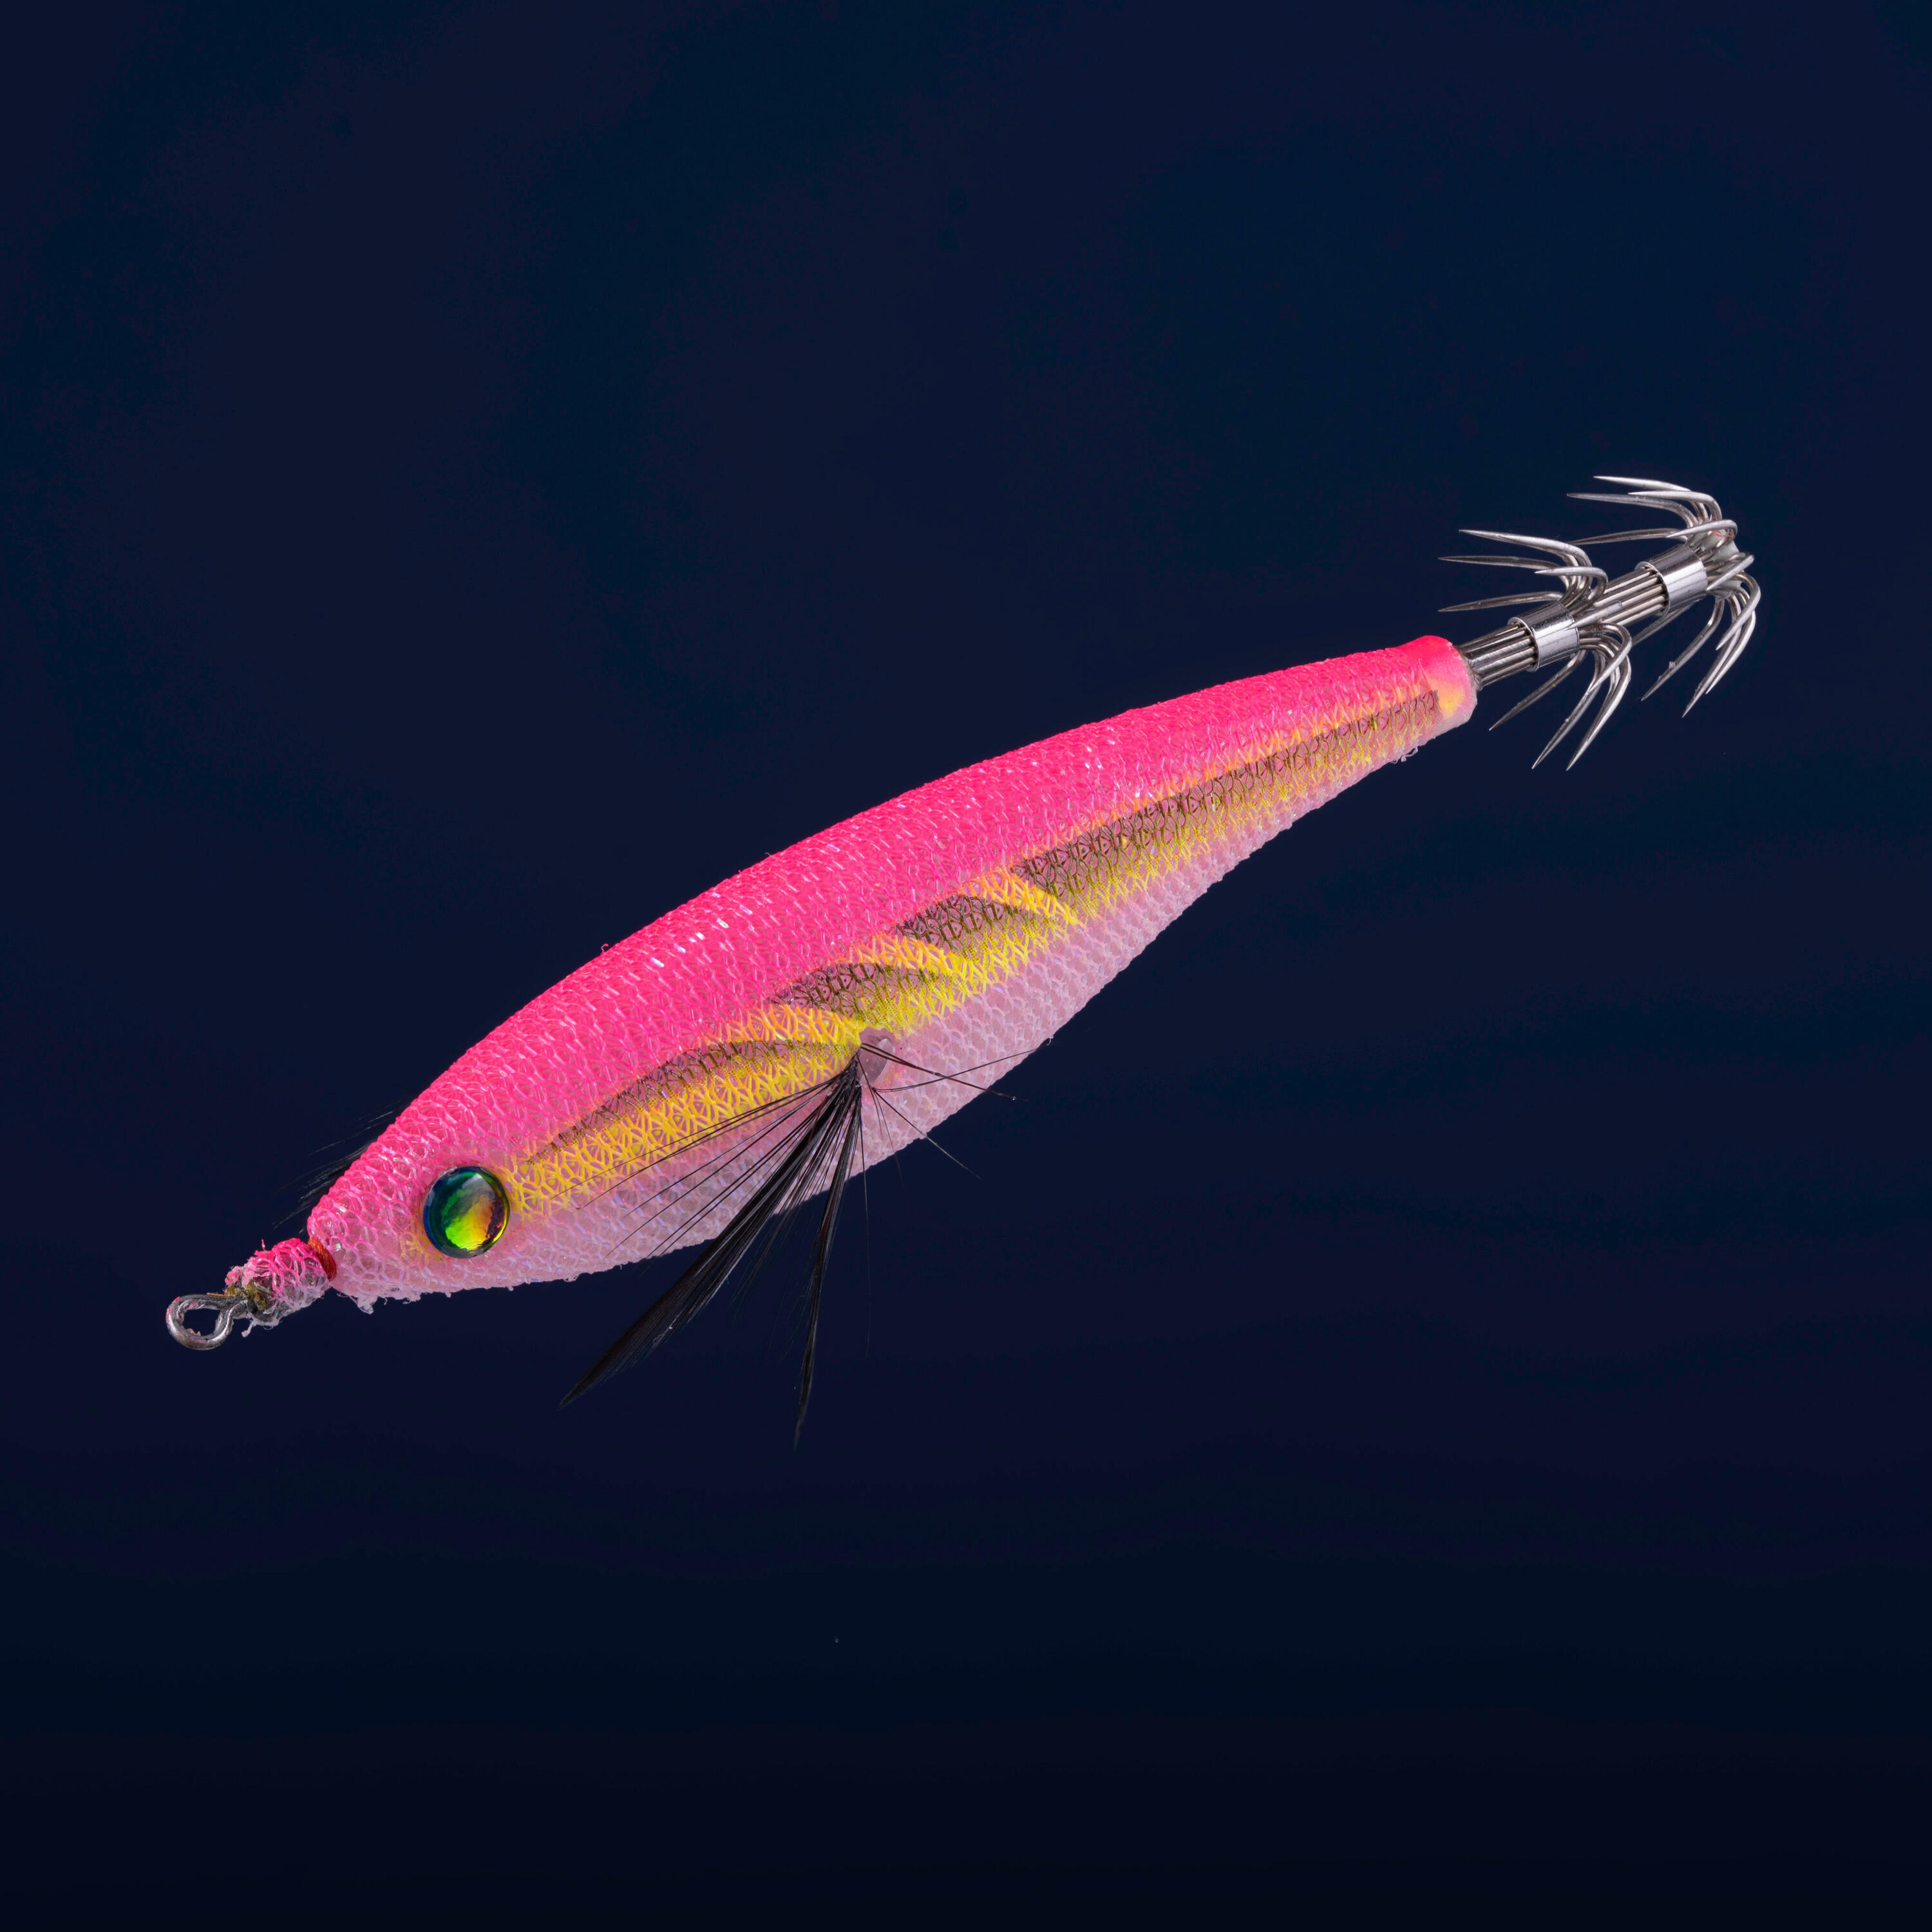 Floating jig for cuttlefish/squid fishing EBIFLO 2.5/110 - Neon pink 2/4